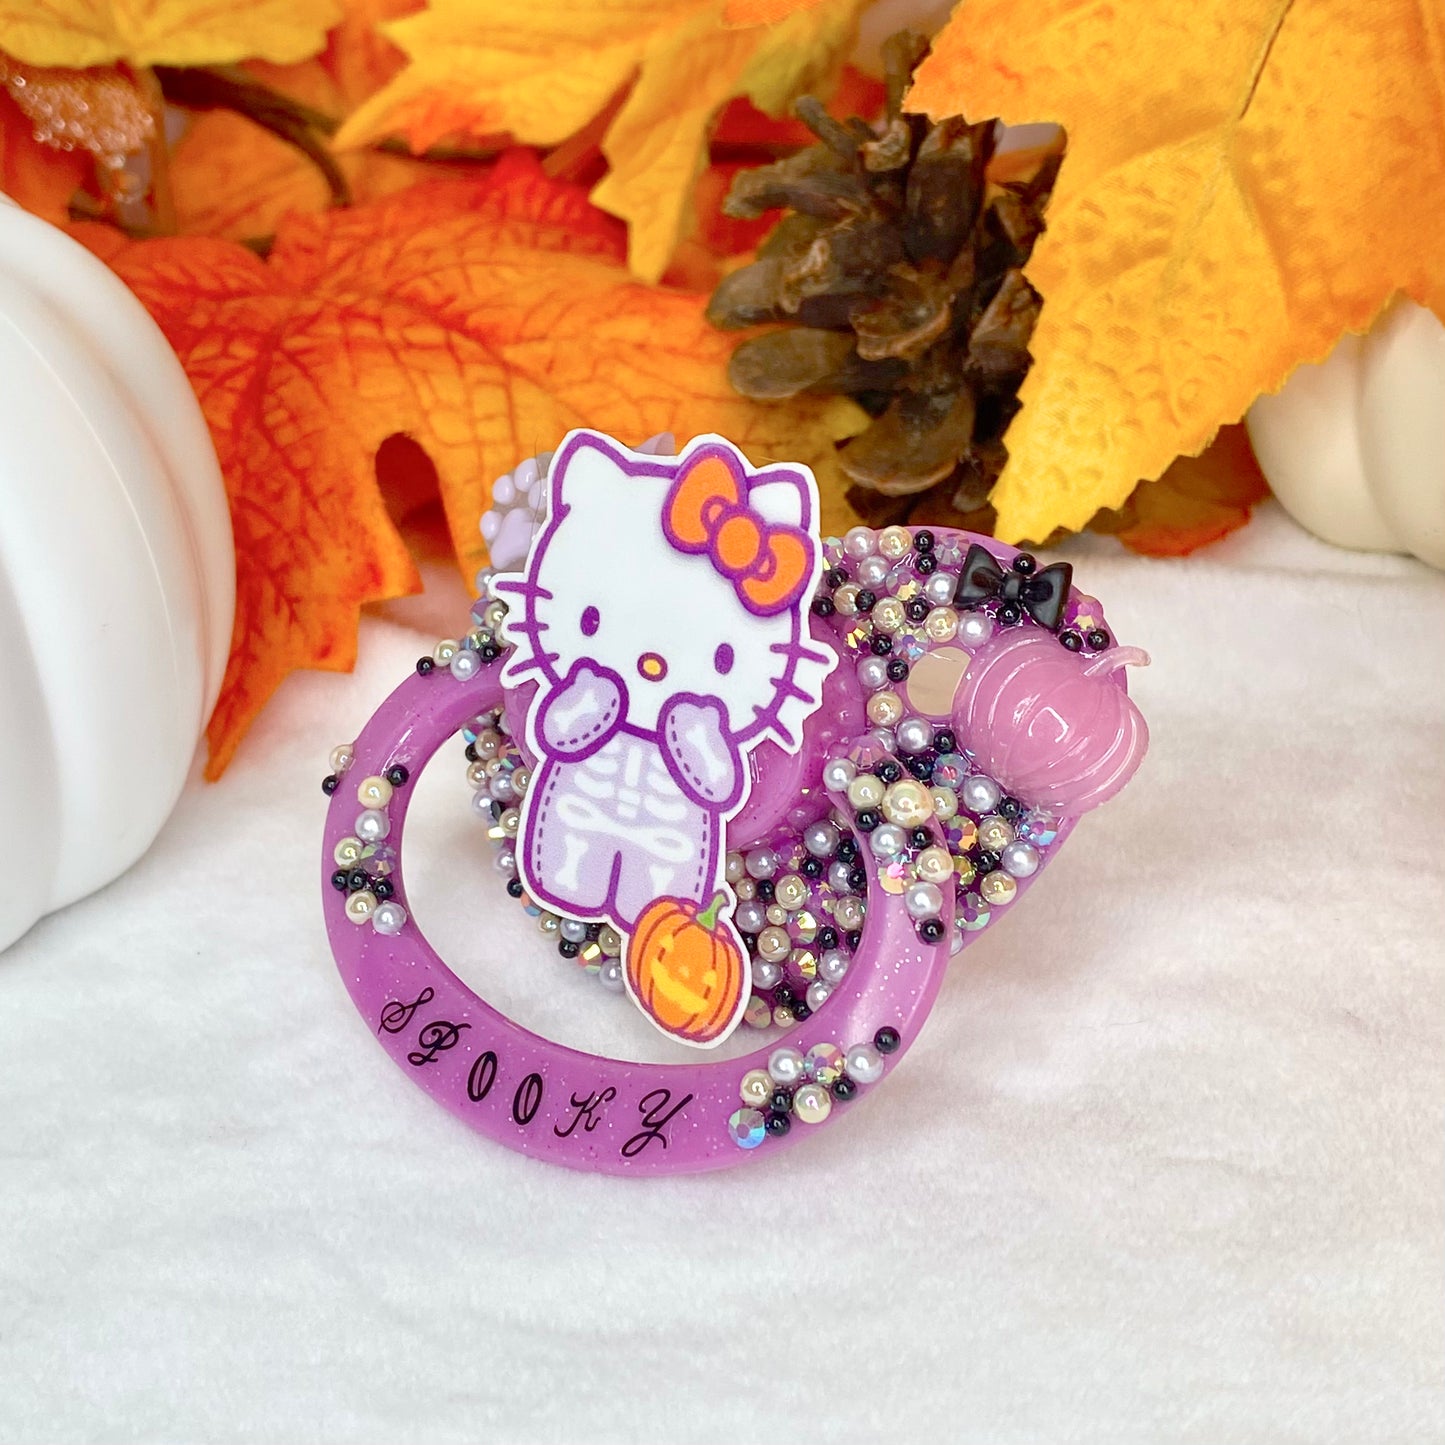 "Spooky hello kitty - Adult pacifier